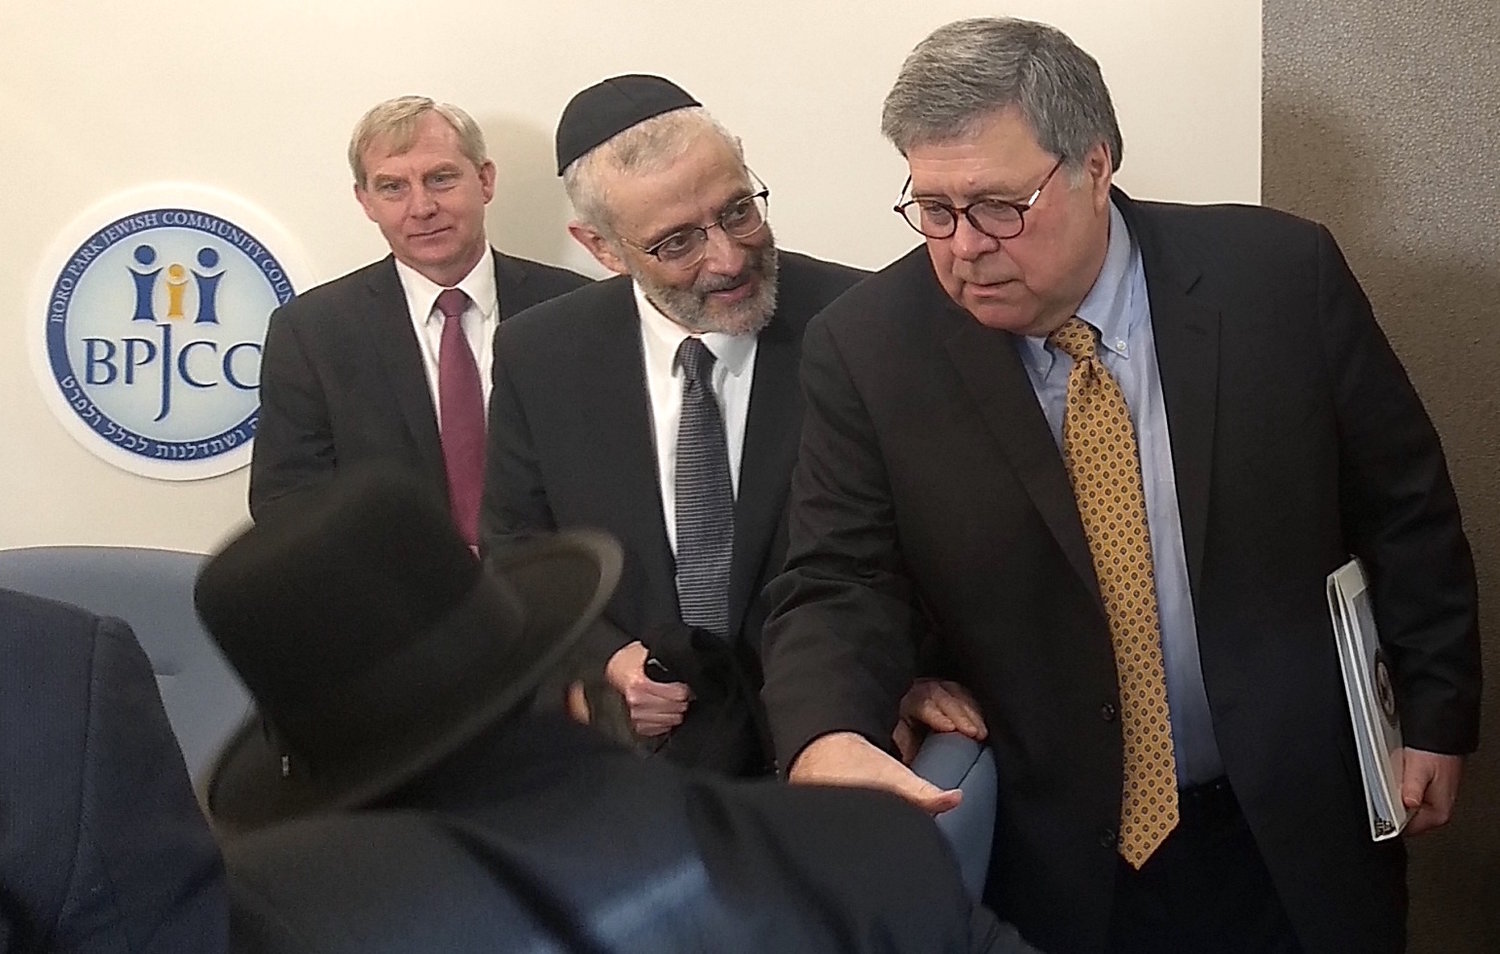 U.S. Attorney General William Barr (right) met in Borough Park with Orthodox leaders, including Agudath Israel of America Executive Vice-President Chaim Dovid Zwiebel (center) on Tuesday.